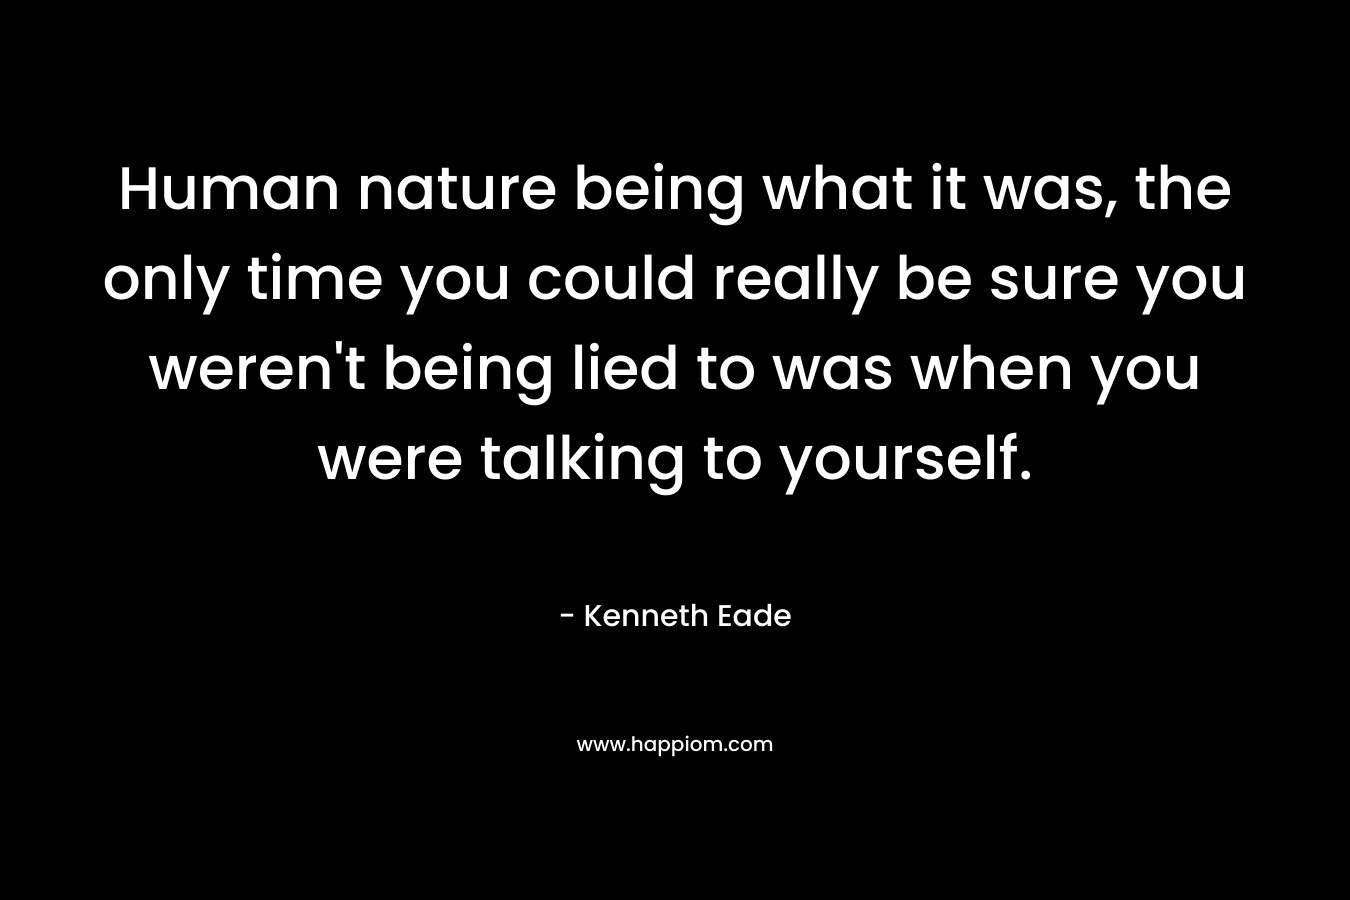 Human nature being what it was, the only time you could really be sure you weren't being lied to was when you were talking to yourself.